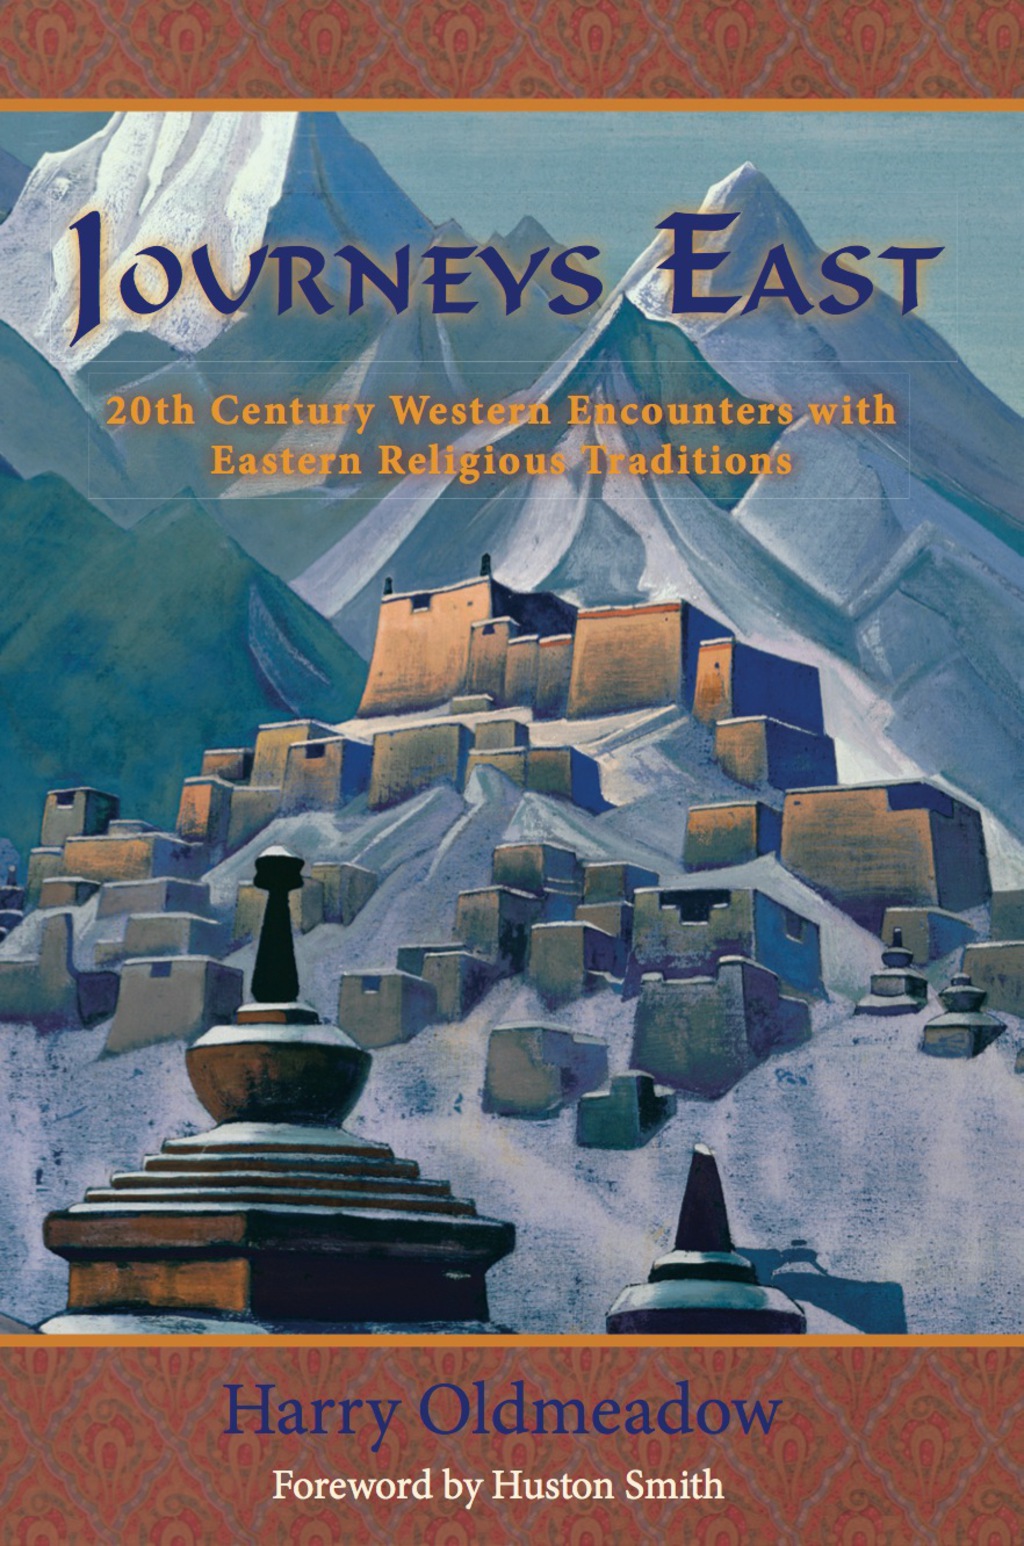 Journeys East: 20th Century Western Encounters with Eastern Religous Traditions (eBook) - Harry Oldmeadow,